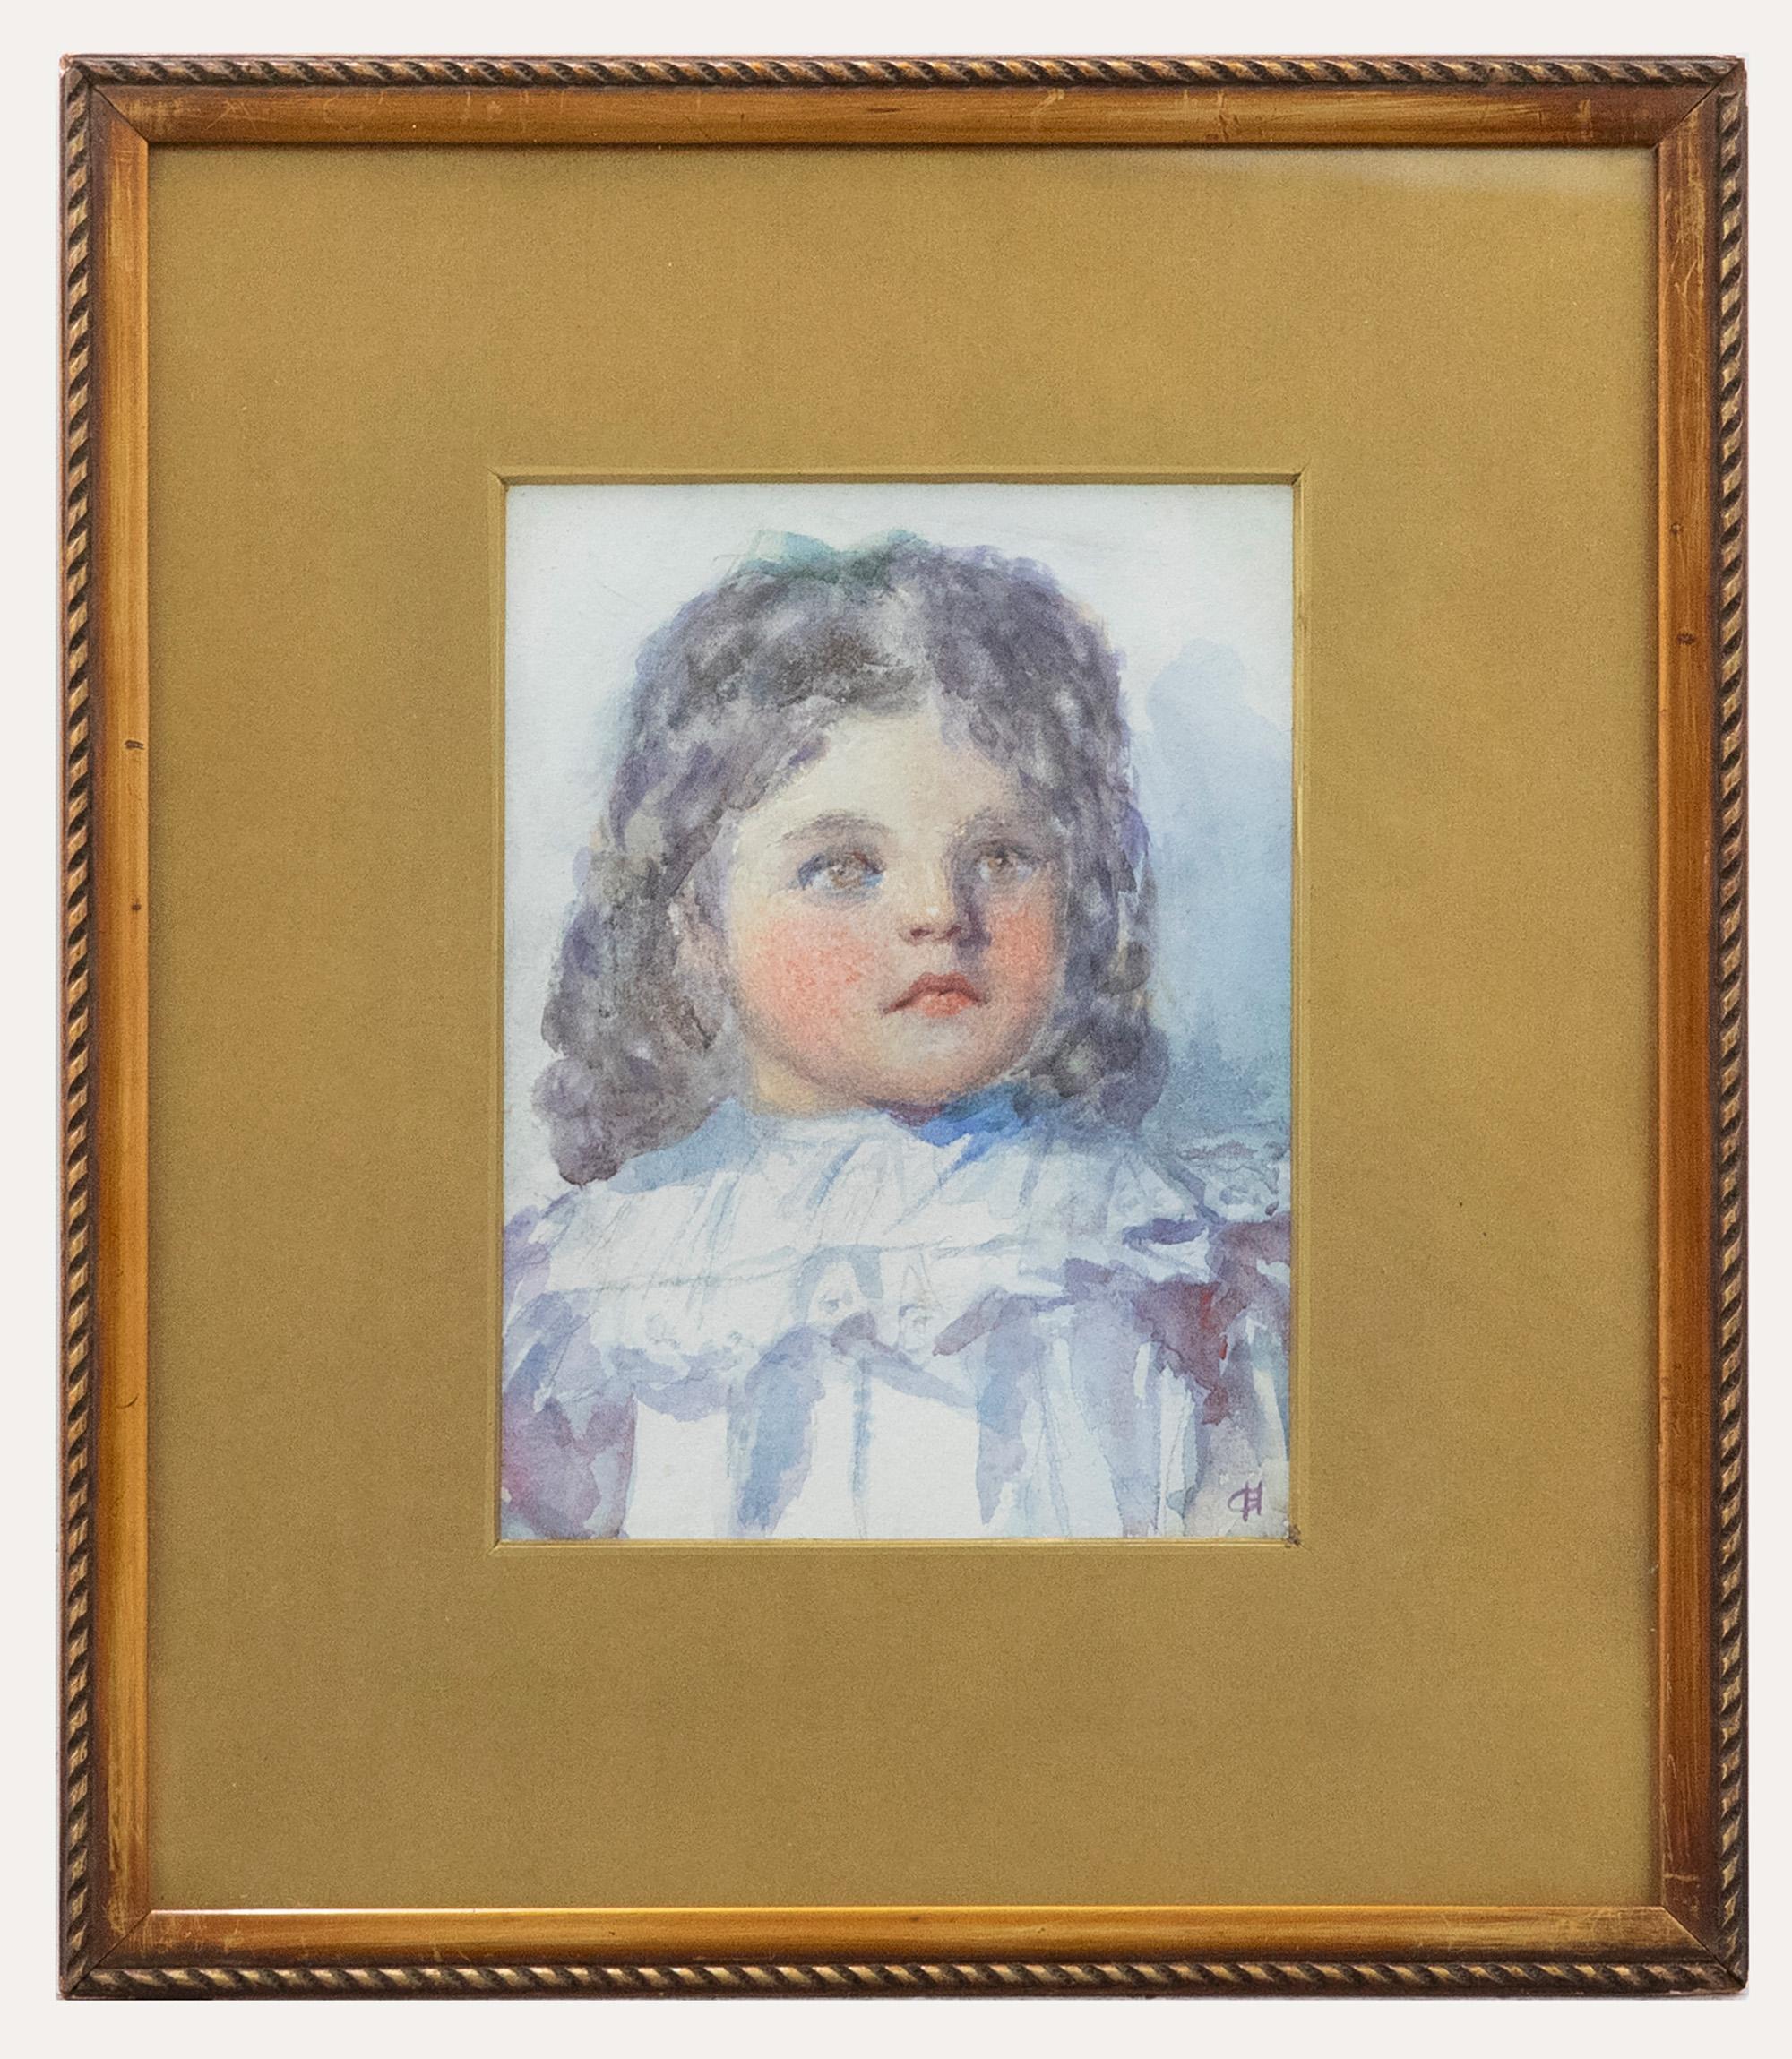 A softly rendered watercolour portrait of a your girl by British painter and illustrator Gertrude Demain Hammond (1862-1953). Well-presented in a decorative gilt-effect frame with a ribbon twist running pattern and plain gilt mount. Signed with